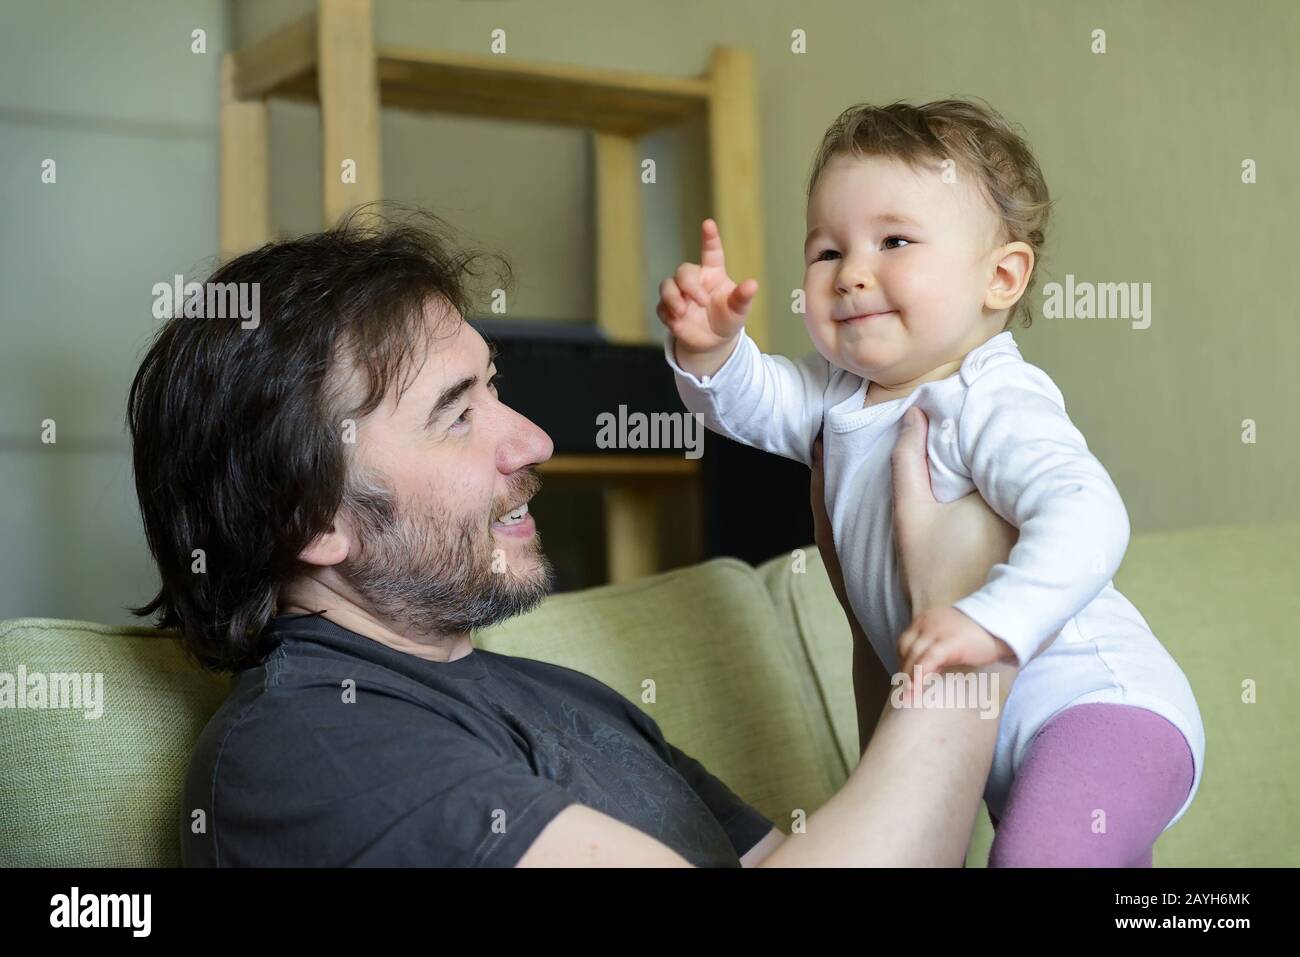 Happy baby plays with father on the couch at home. Baby points his finger. Stock Photo